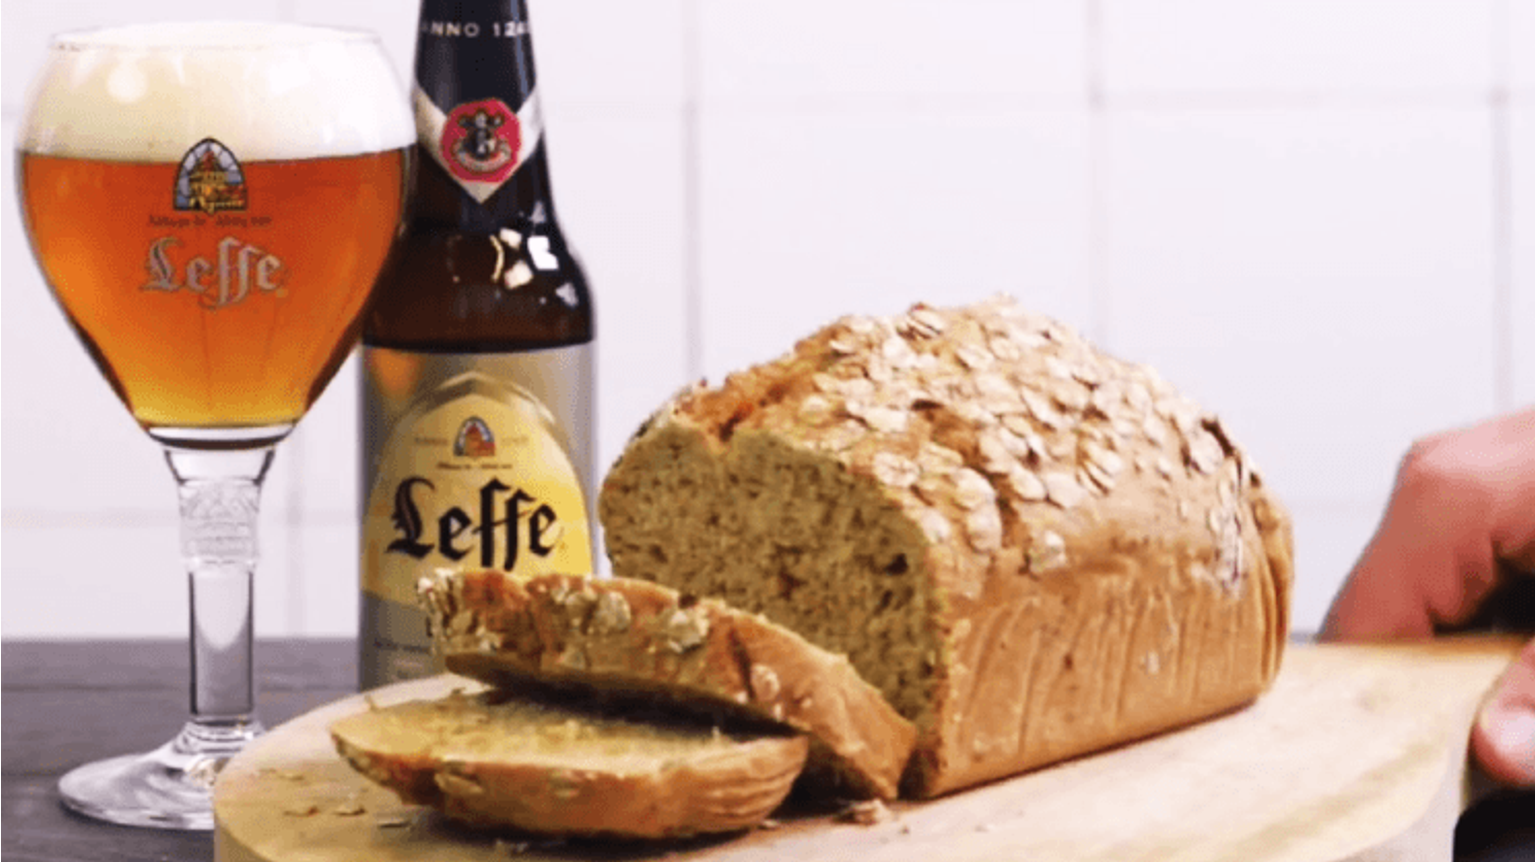 thumbnail for blog article named: Bread, beer and the joy of baking...